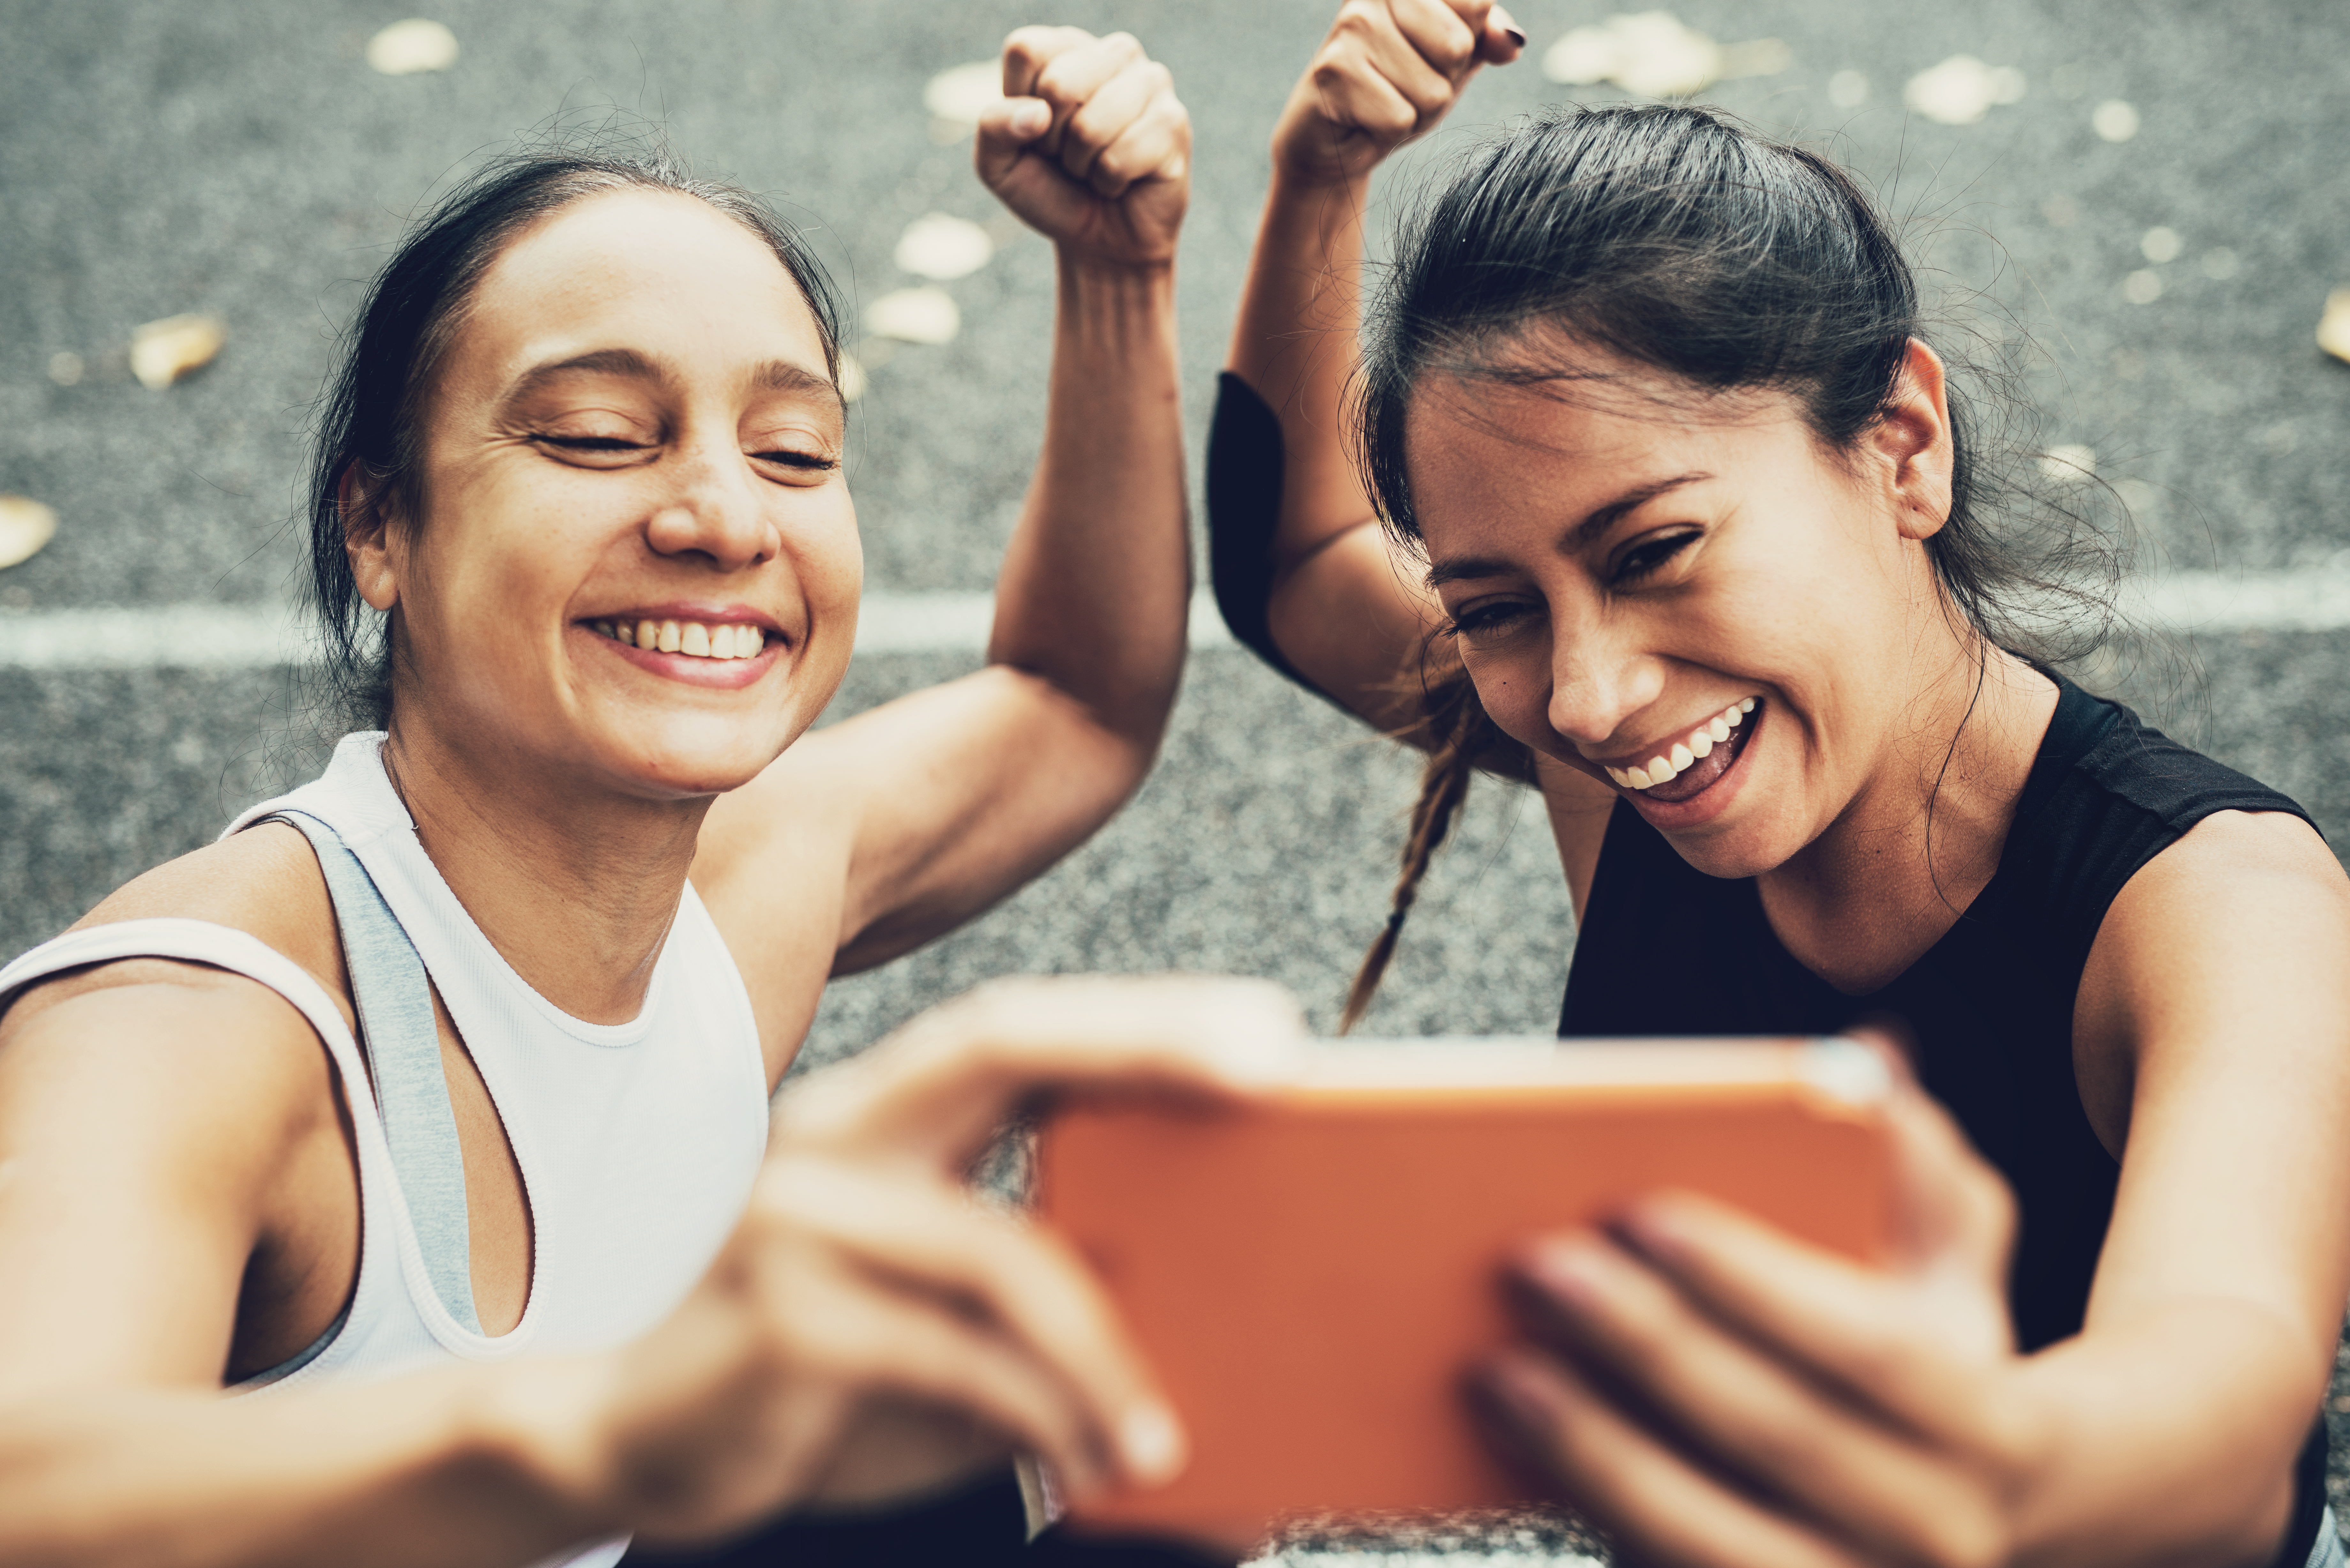 Two girls take a selfie while flexing their arms